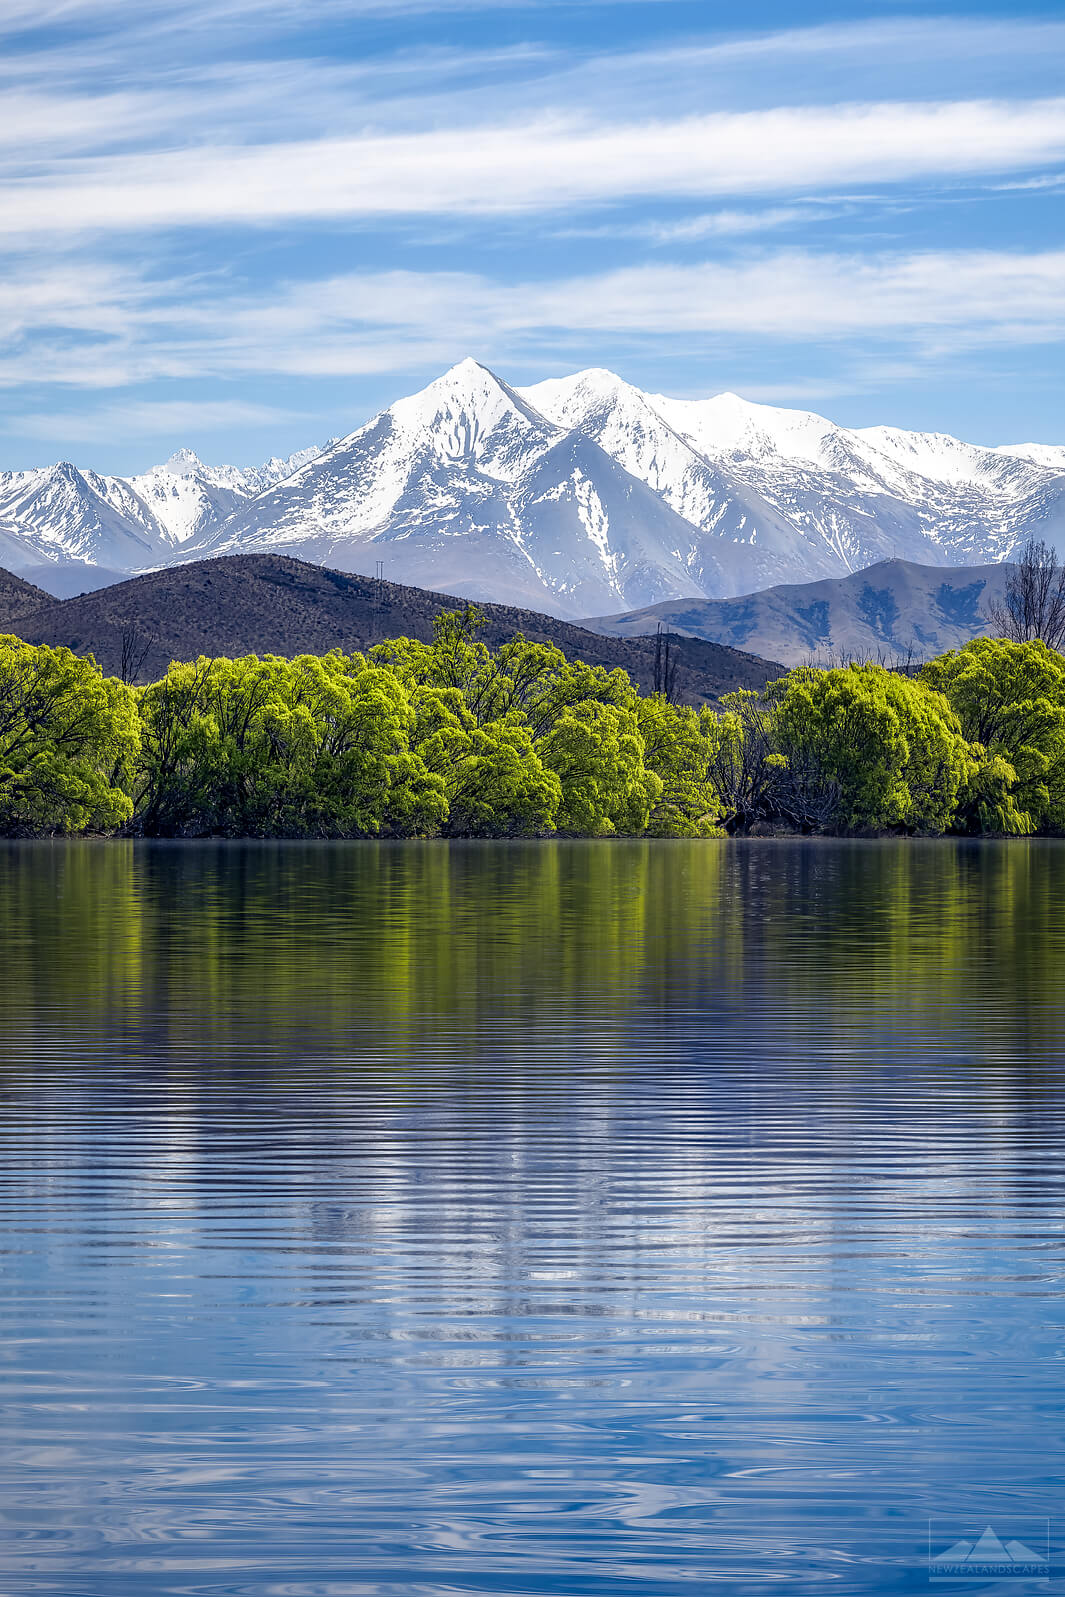 trees reflected in the lake with snow capped mountains in the background.